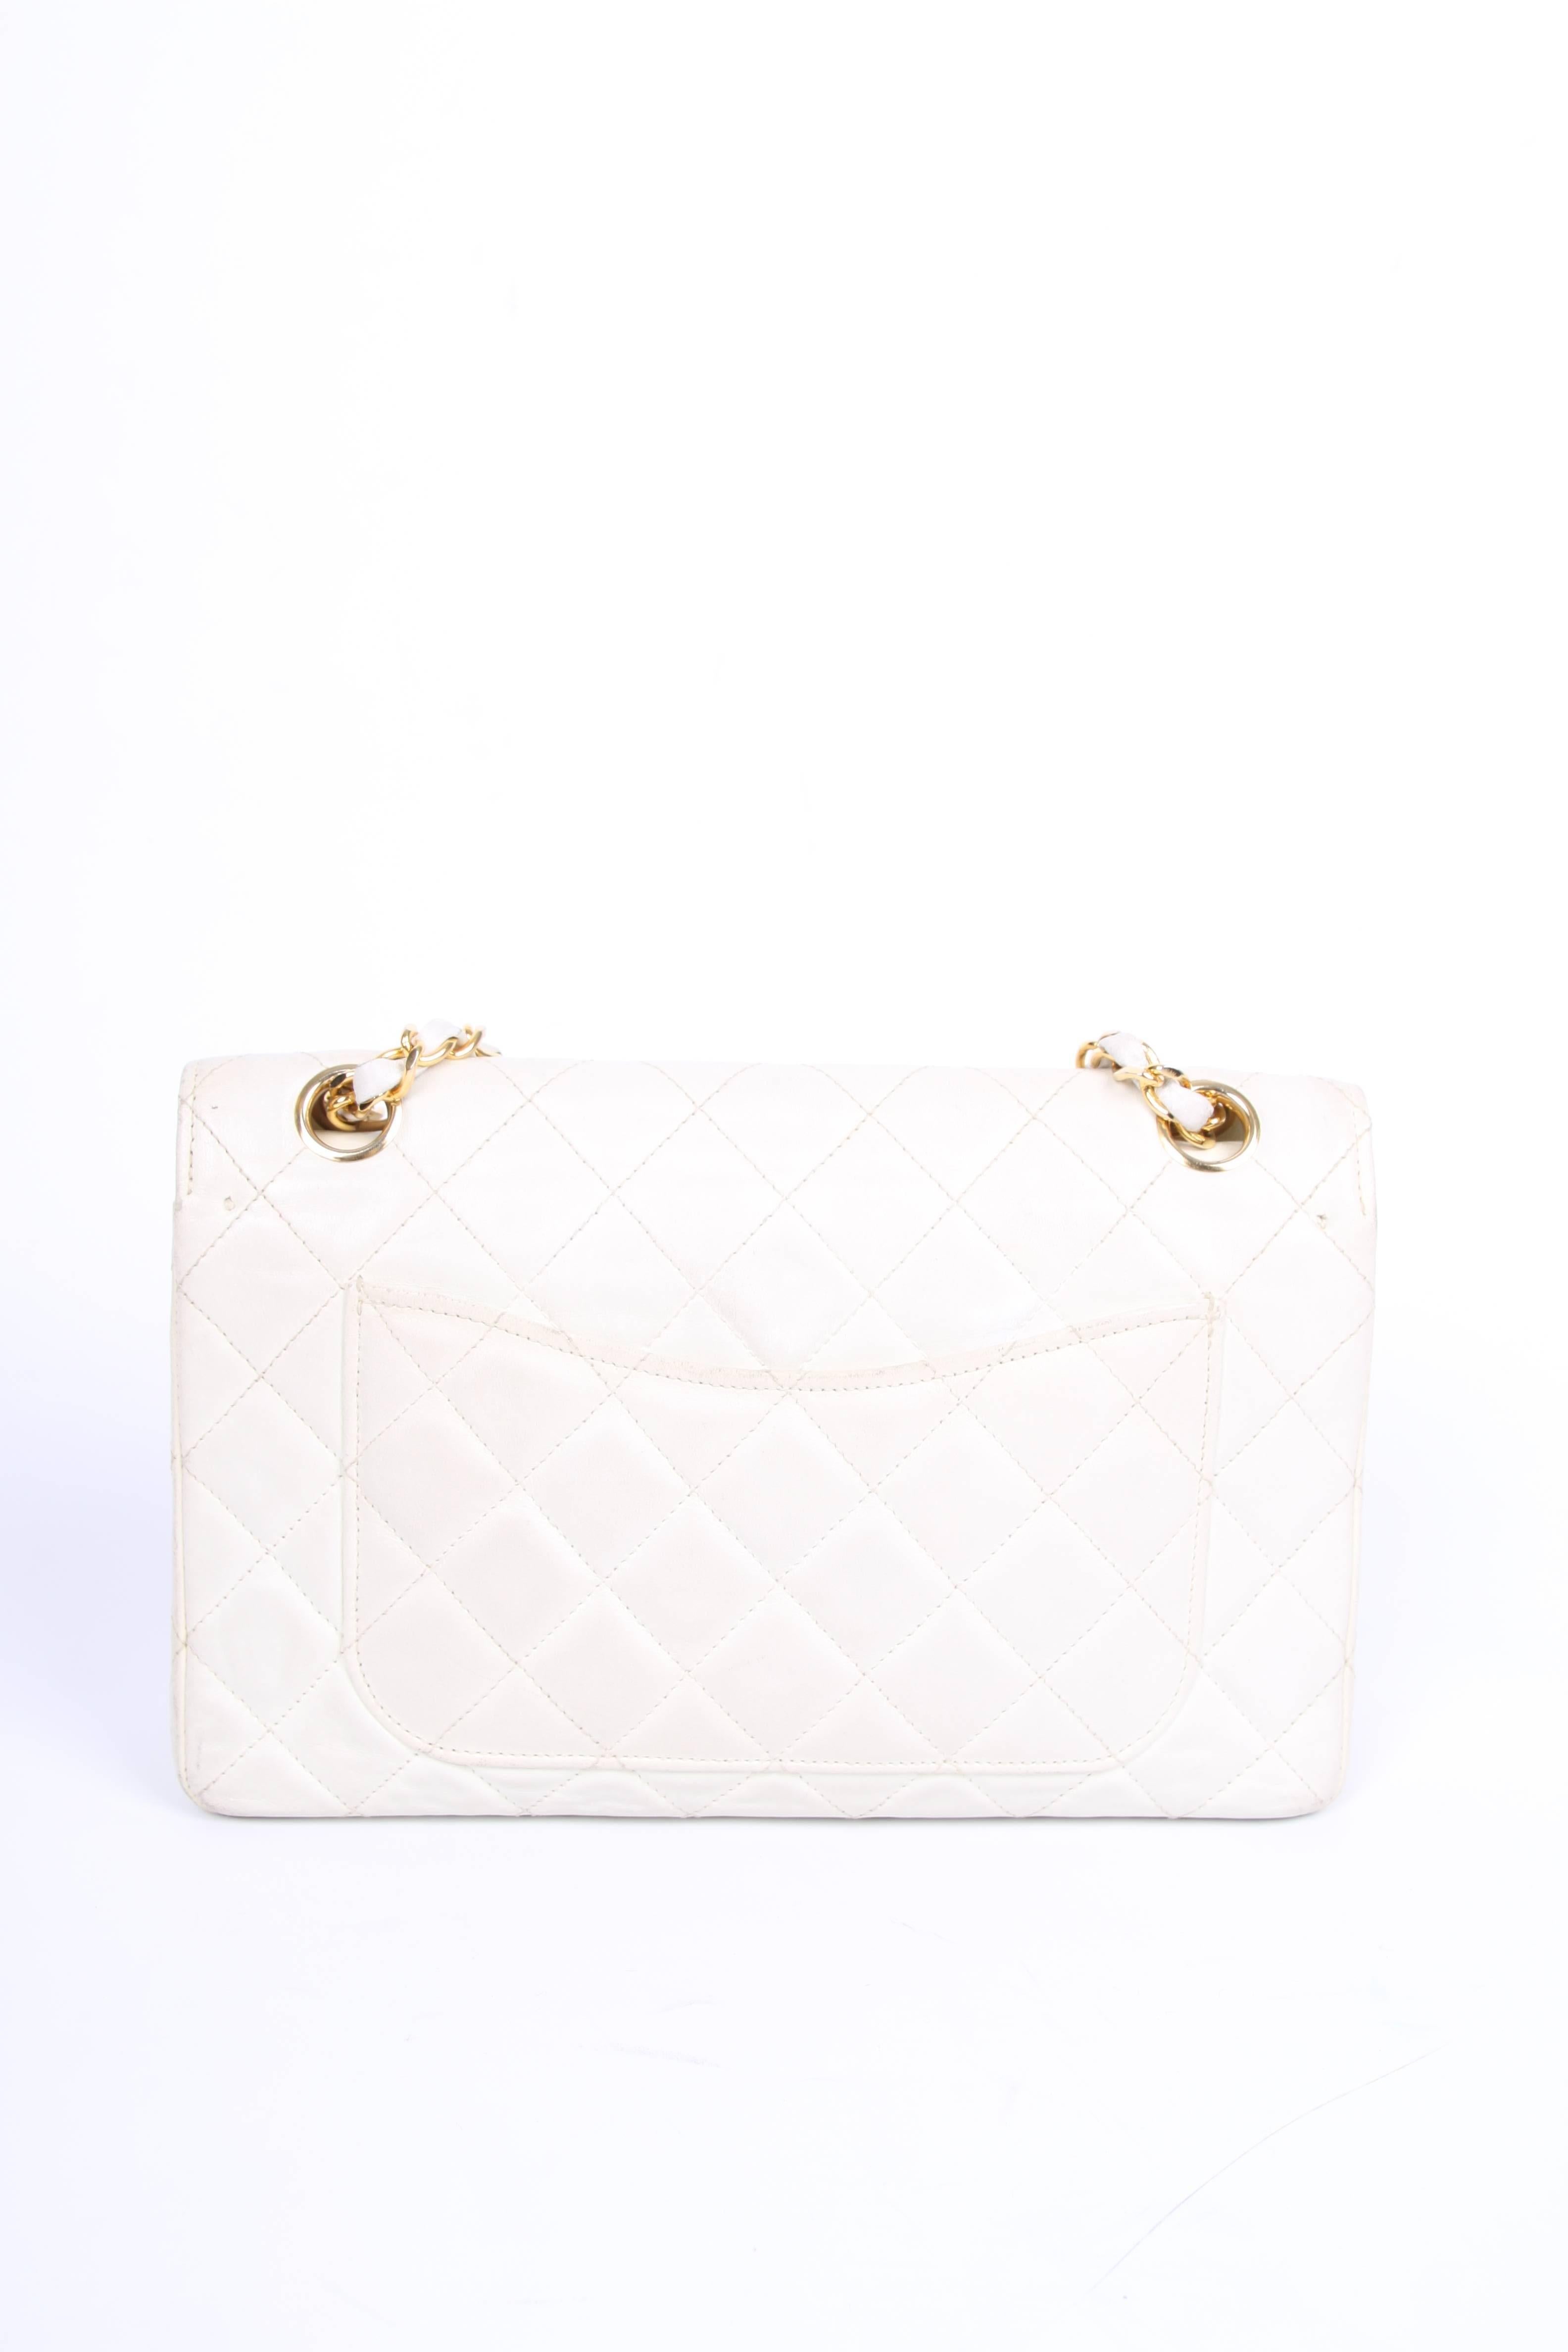 This one is really old, rare and a collector's item!

A vintage Chanel Double Flap Bag that's about 33 years of age. It is one of the first bags with a CC turnlock closure designed by Karl Lagerfeld in 1983. Very rare!

This ivory white bag is fully